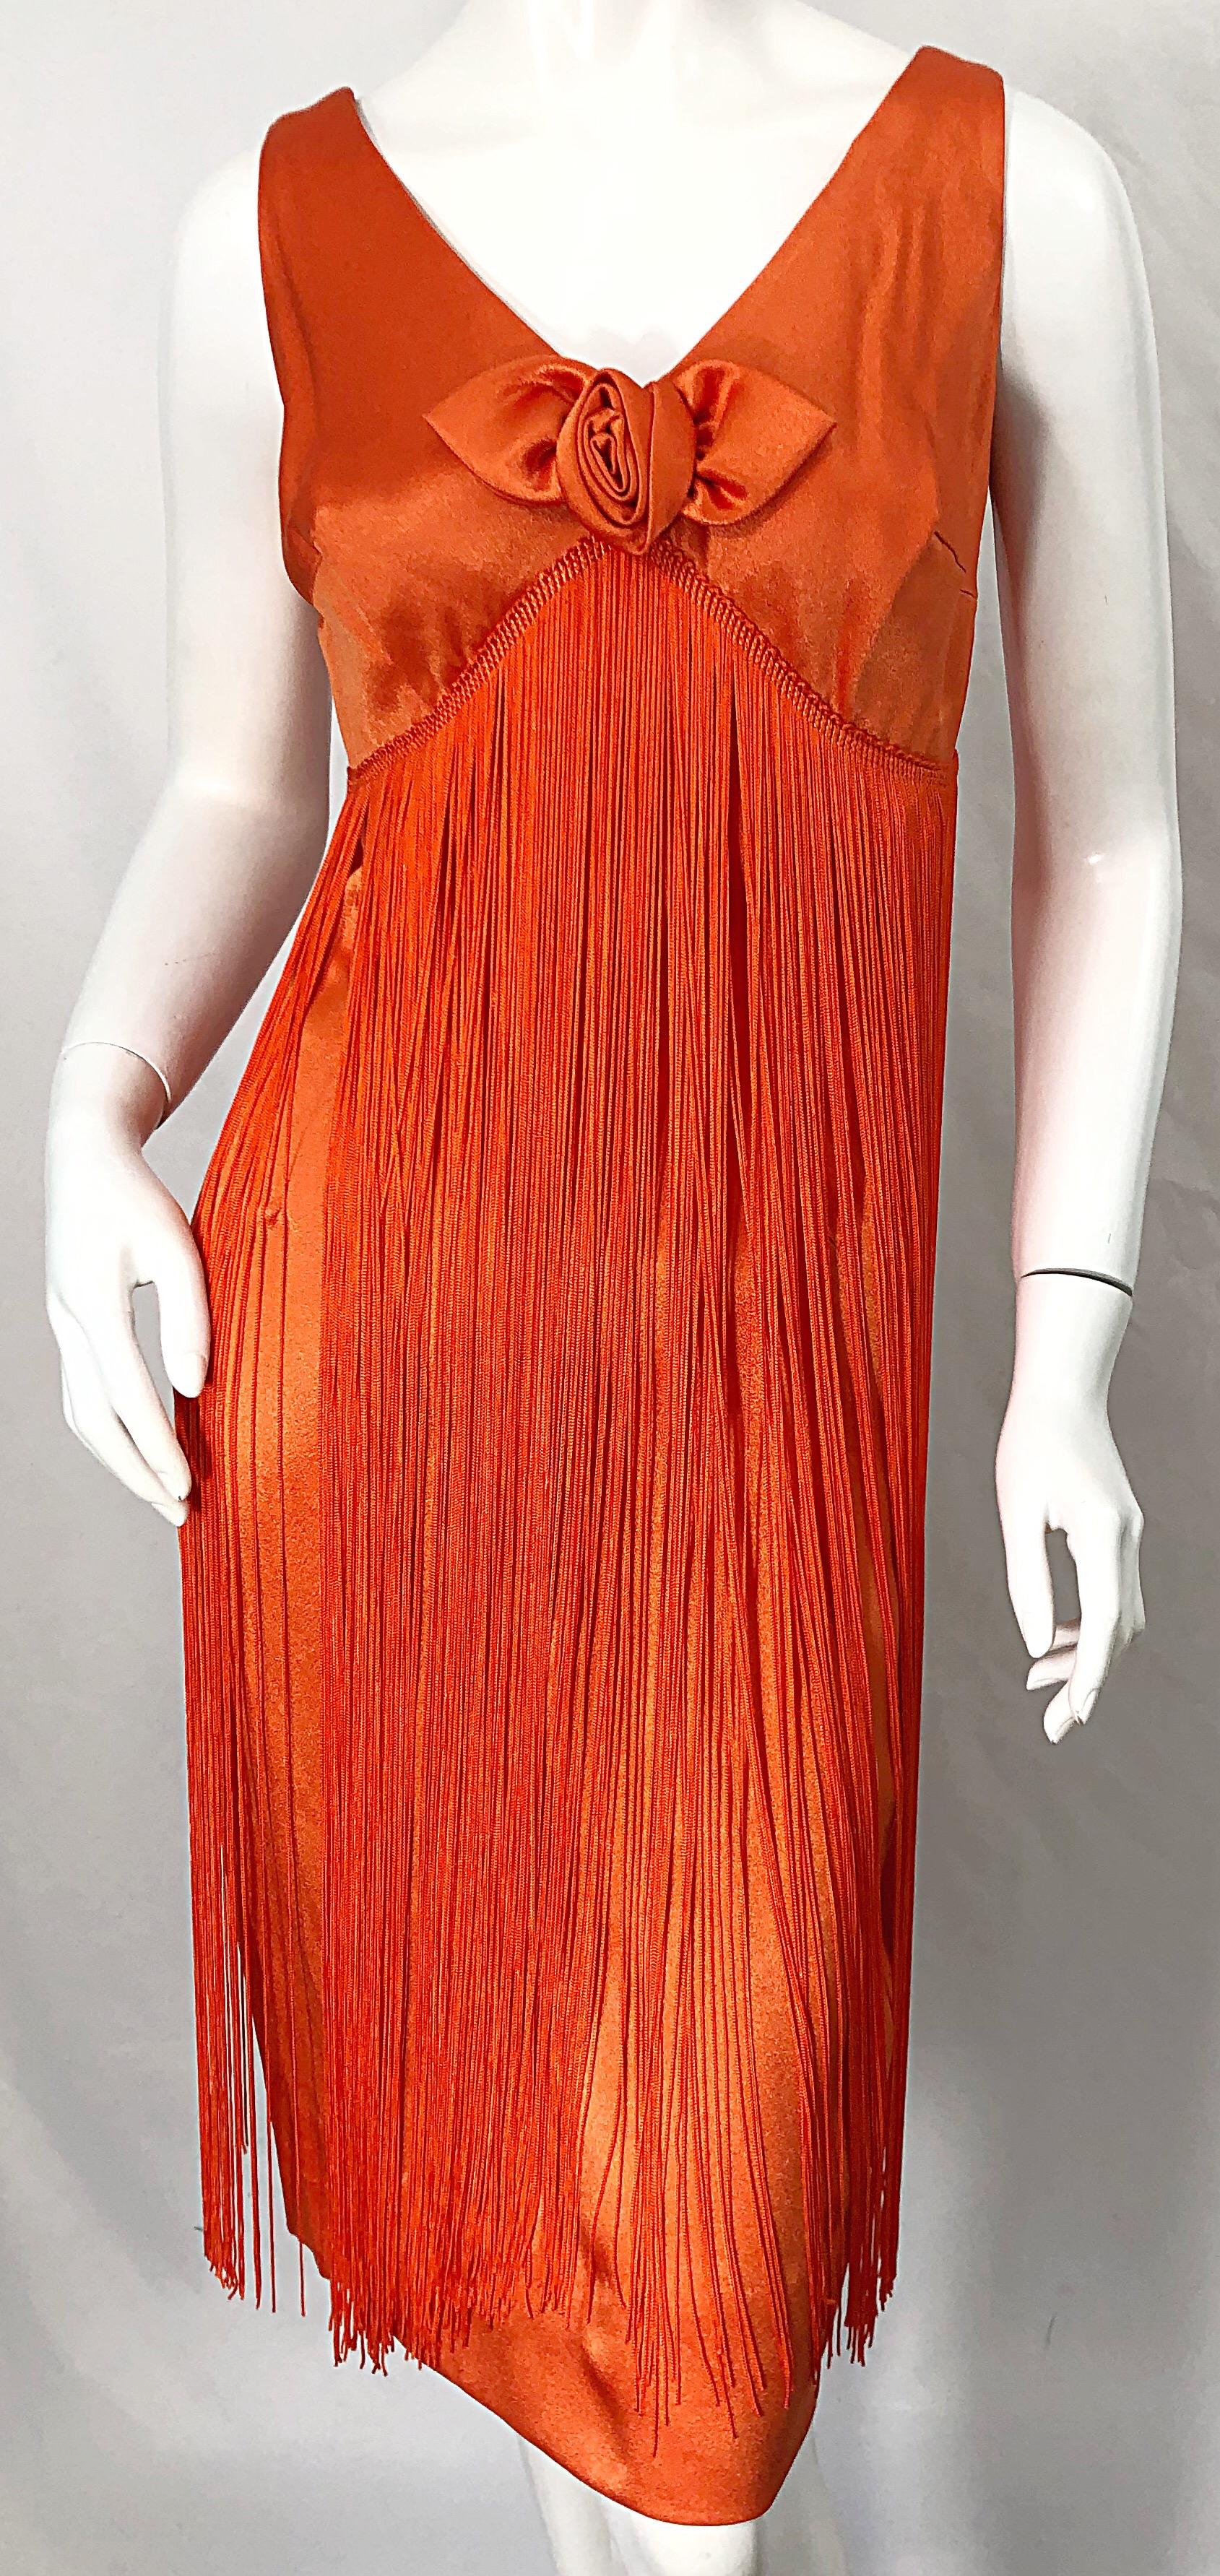 1960s Joseph Magnin Neon Orange Fully Fringed Vintage 60s Flapper Dress In Excellent Condition For Sale In San Diego, CA